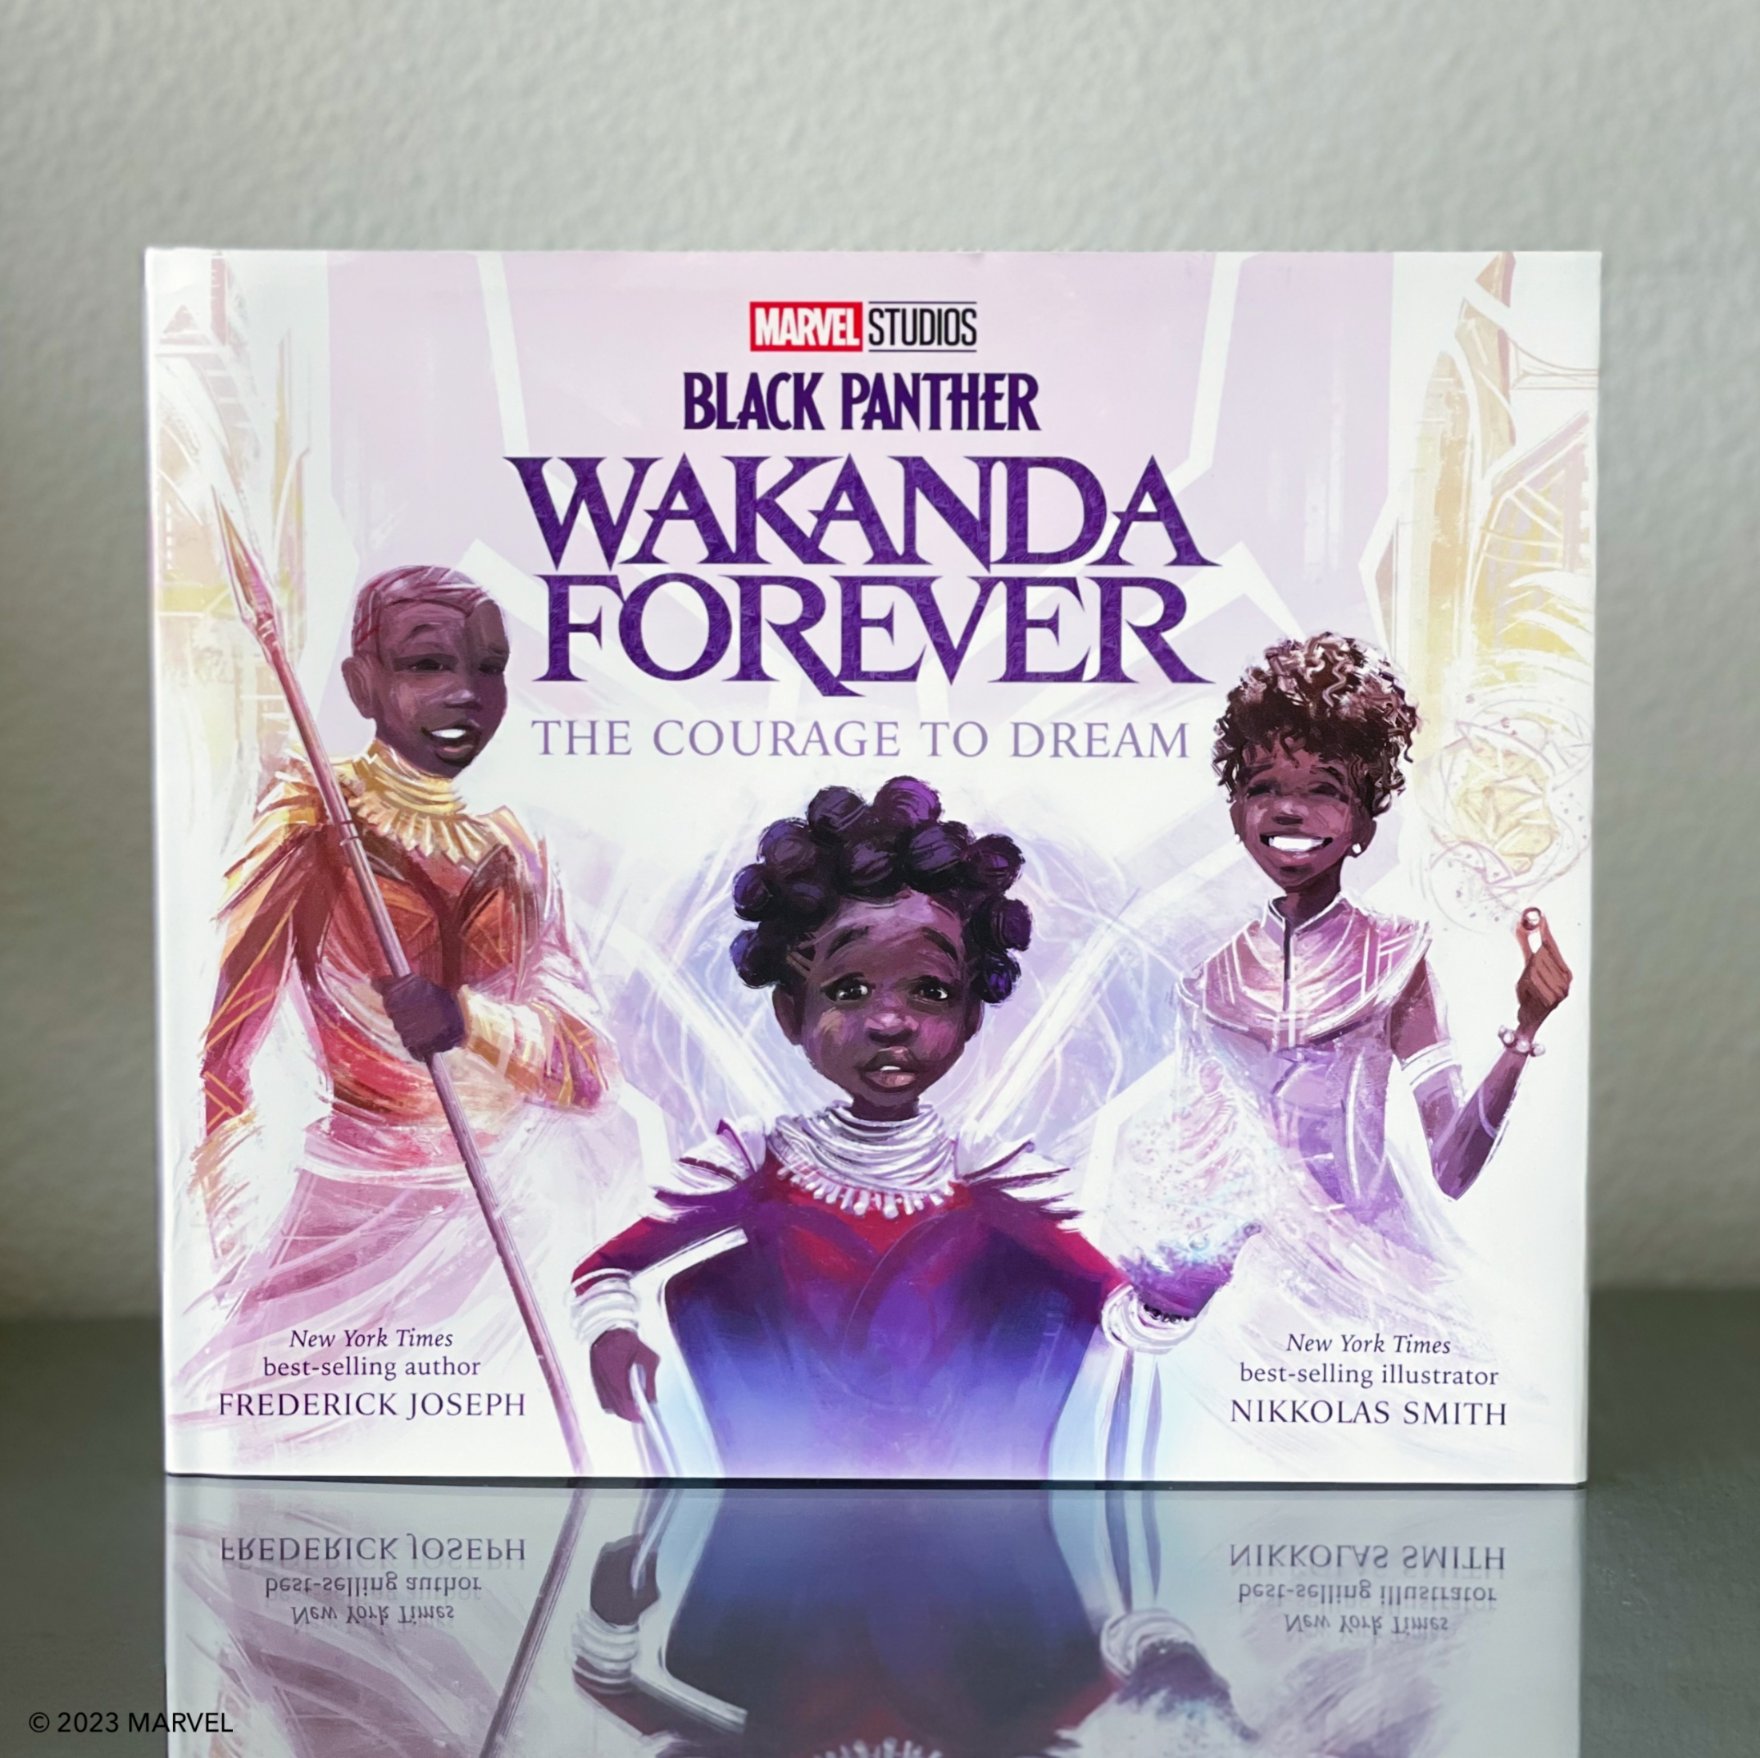 Black Panther: Wakanda Forever (@theblackpanther) / X